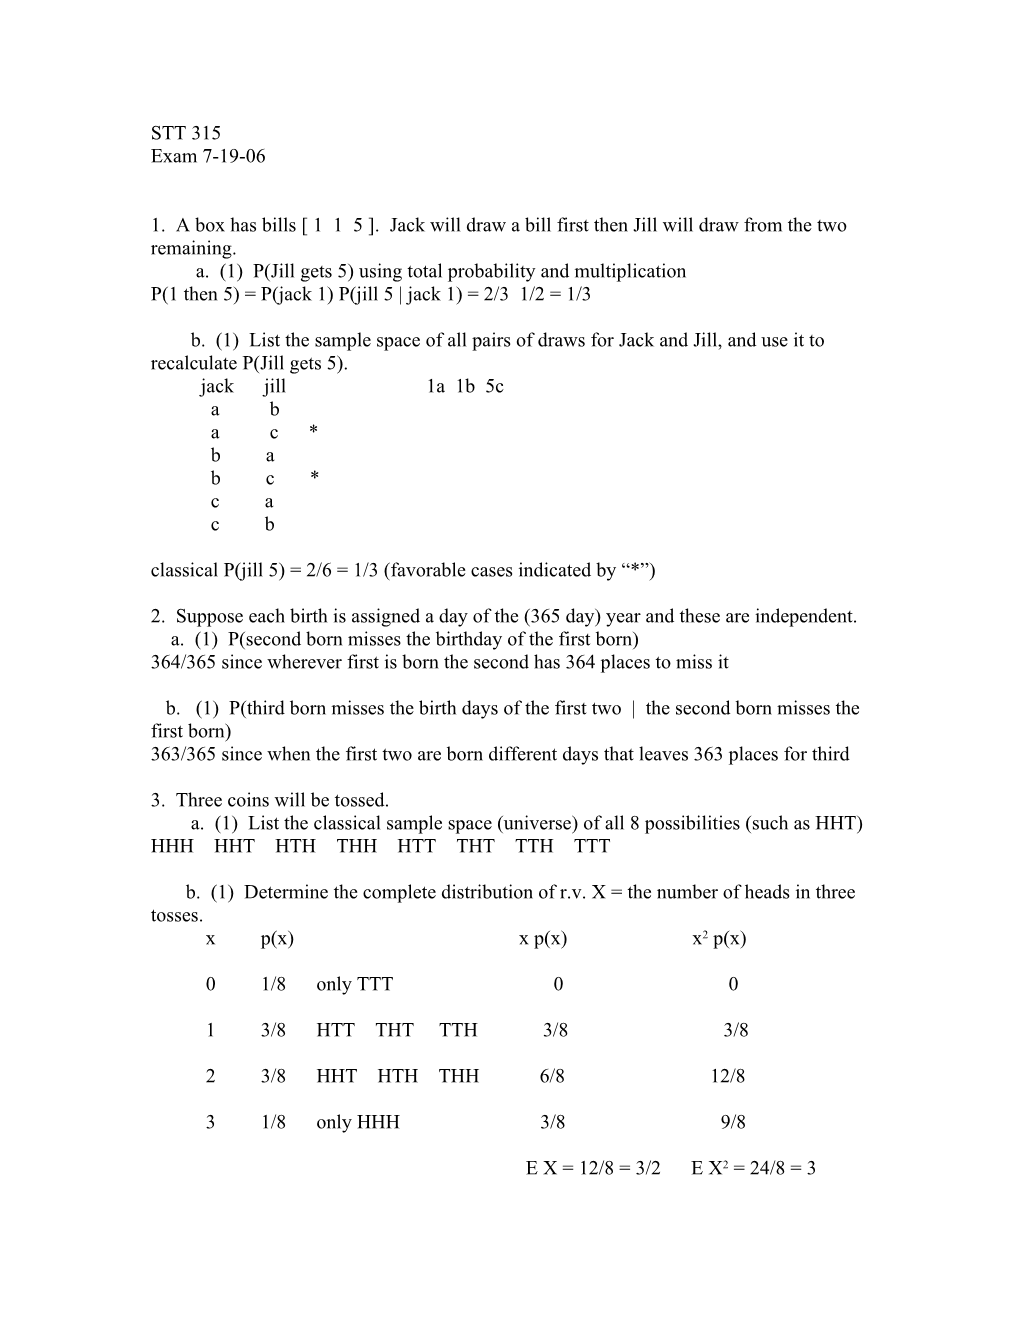 A. (1) P(Jill Gets 5) Using Total Probability and Multiplication